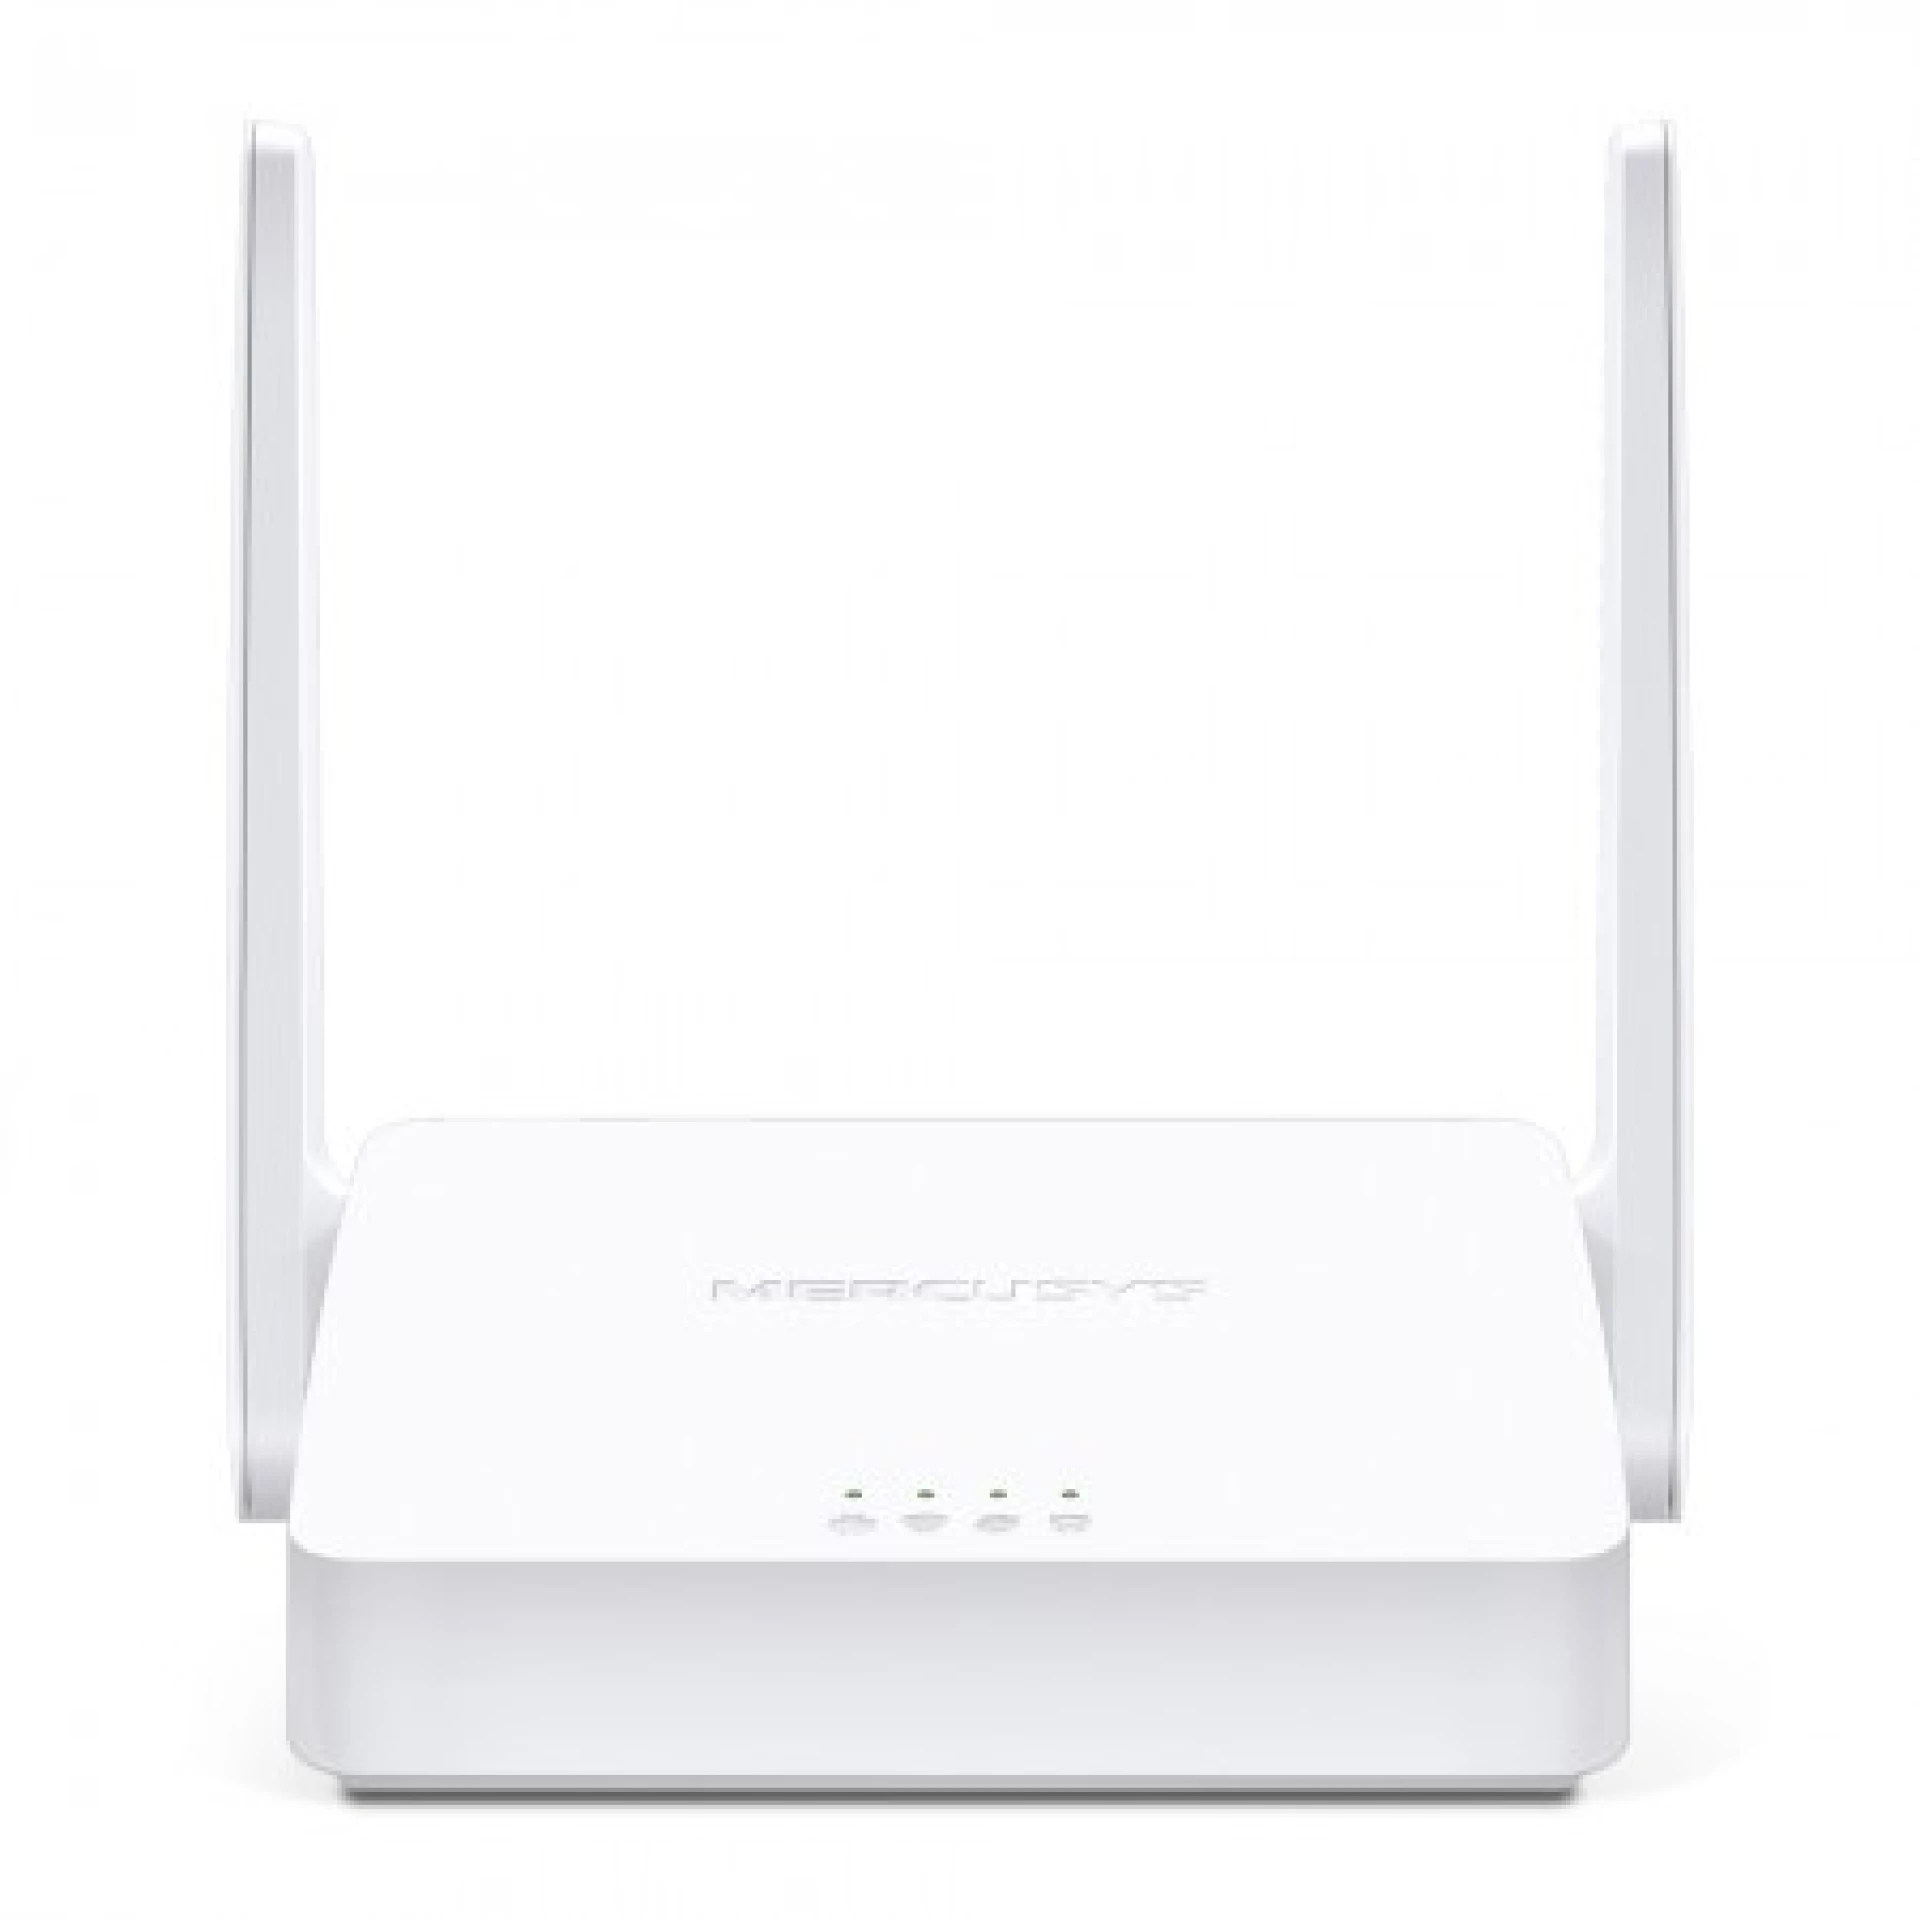 Mercusys MW302R 300Mbps Wireless N Router